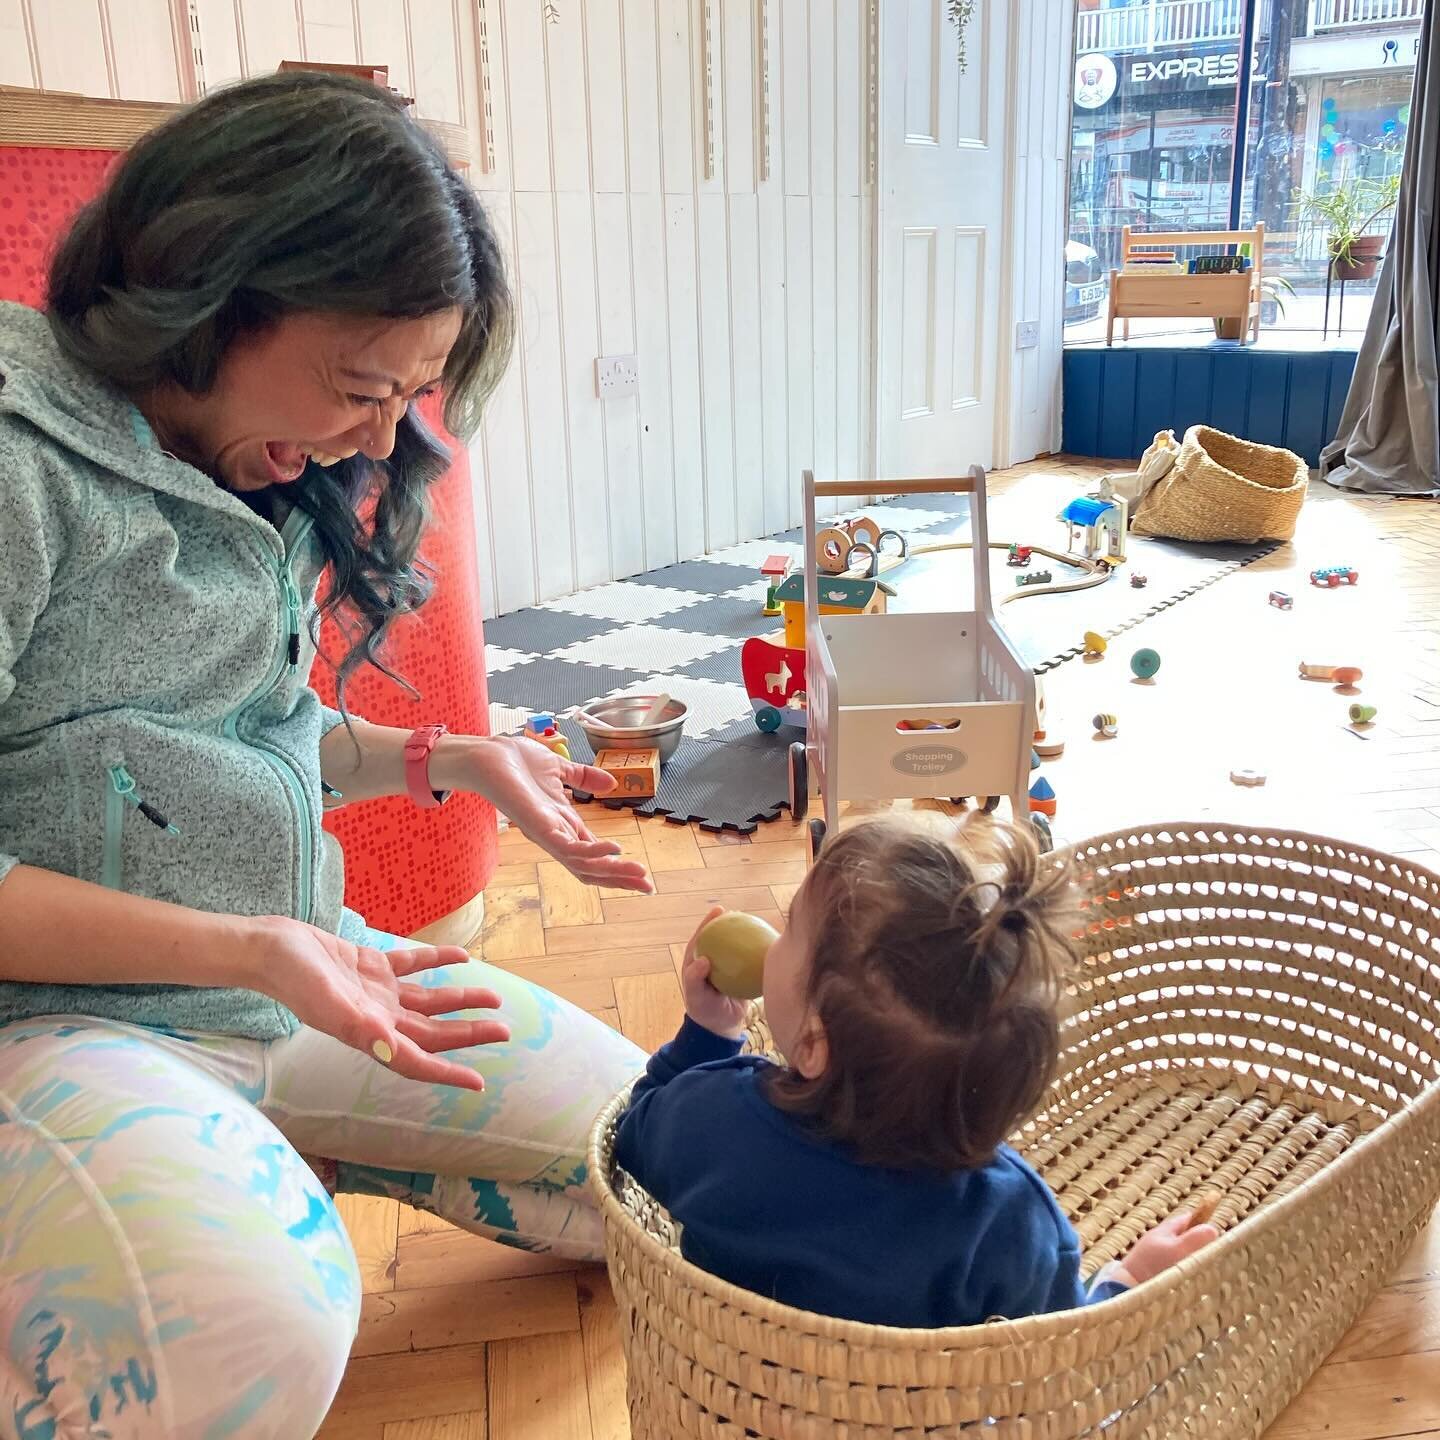 Early years advocate, Karen has been absolutely instrumental in ensuring Mama&rsquo;s attending our workshops were able to take a little time for themselves, while still being in eye sight of their little ones!

We&rsquo;ve learnt that a key part to 